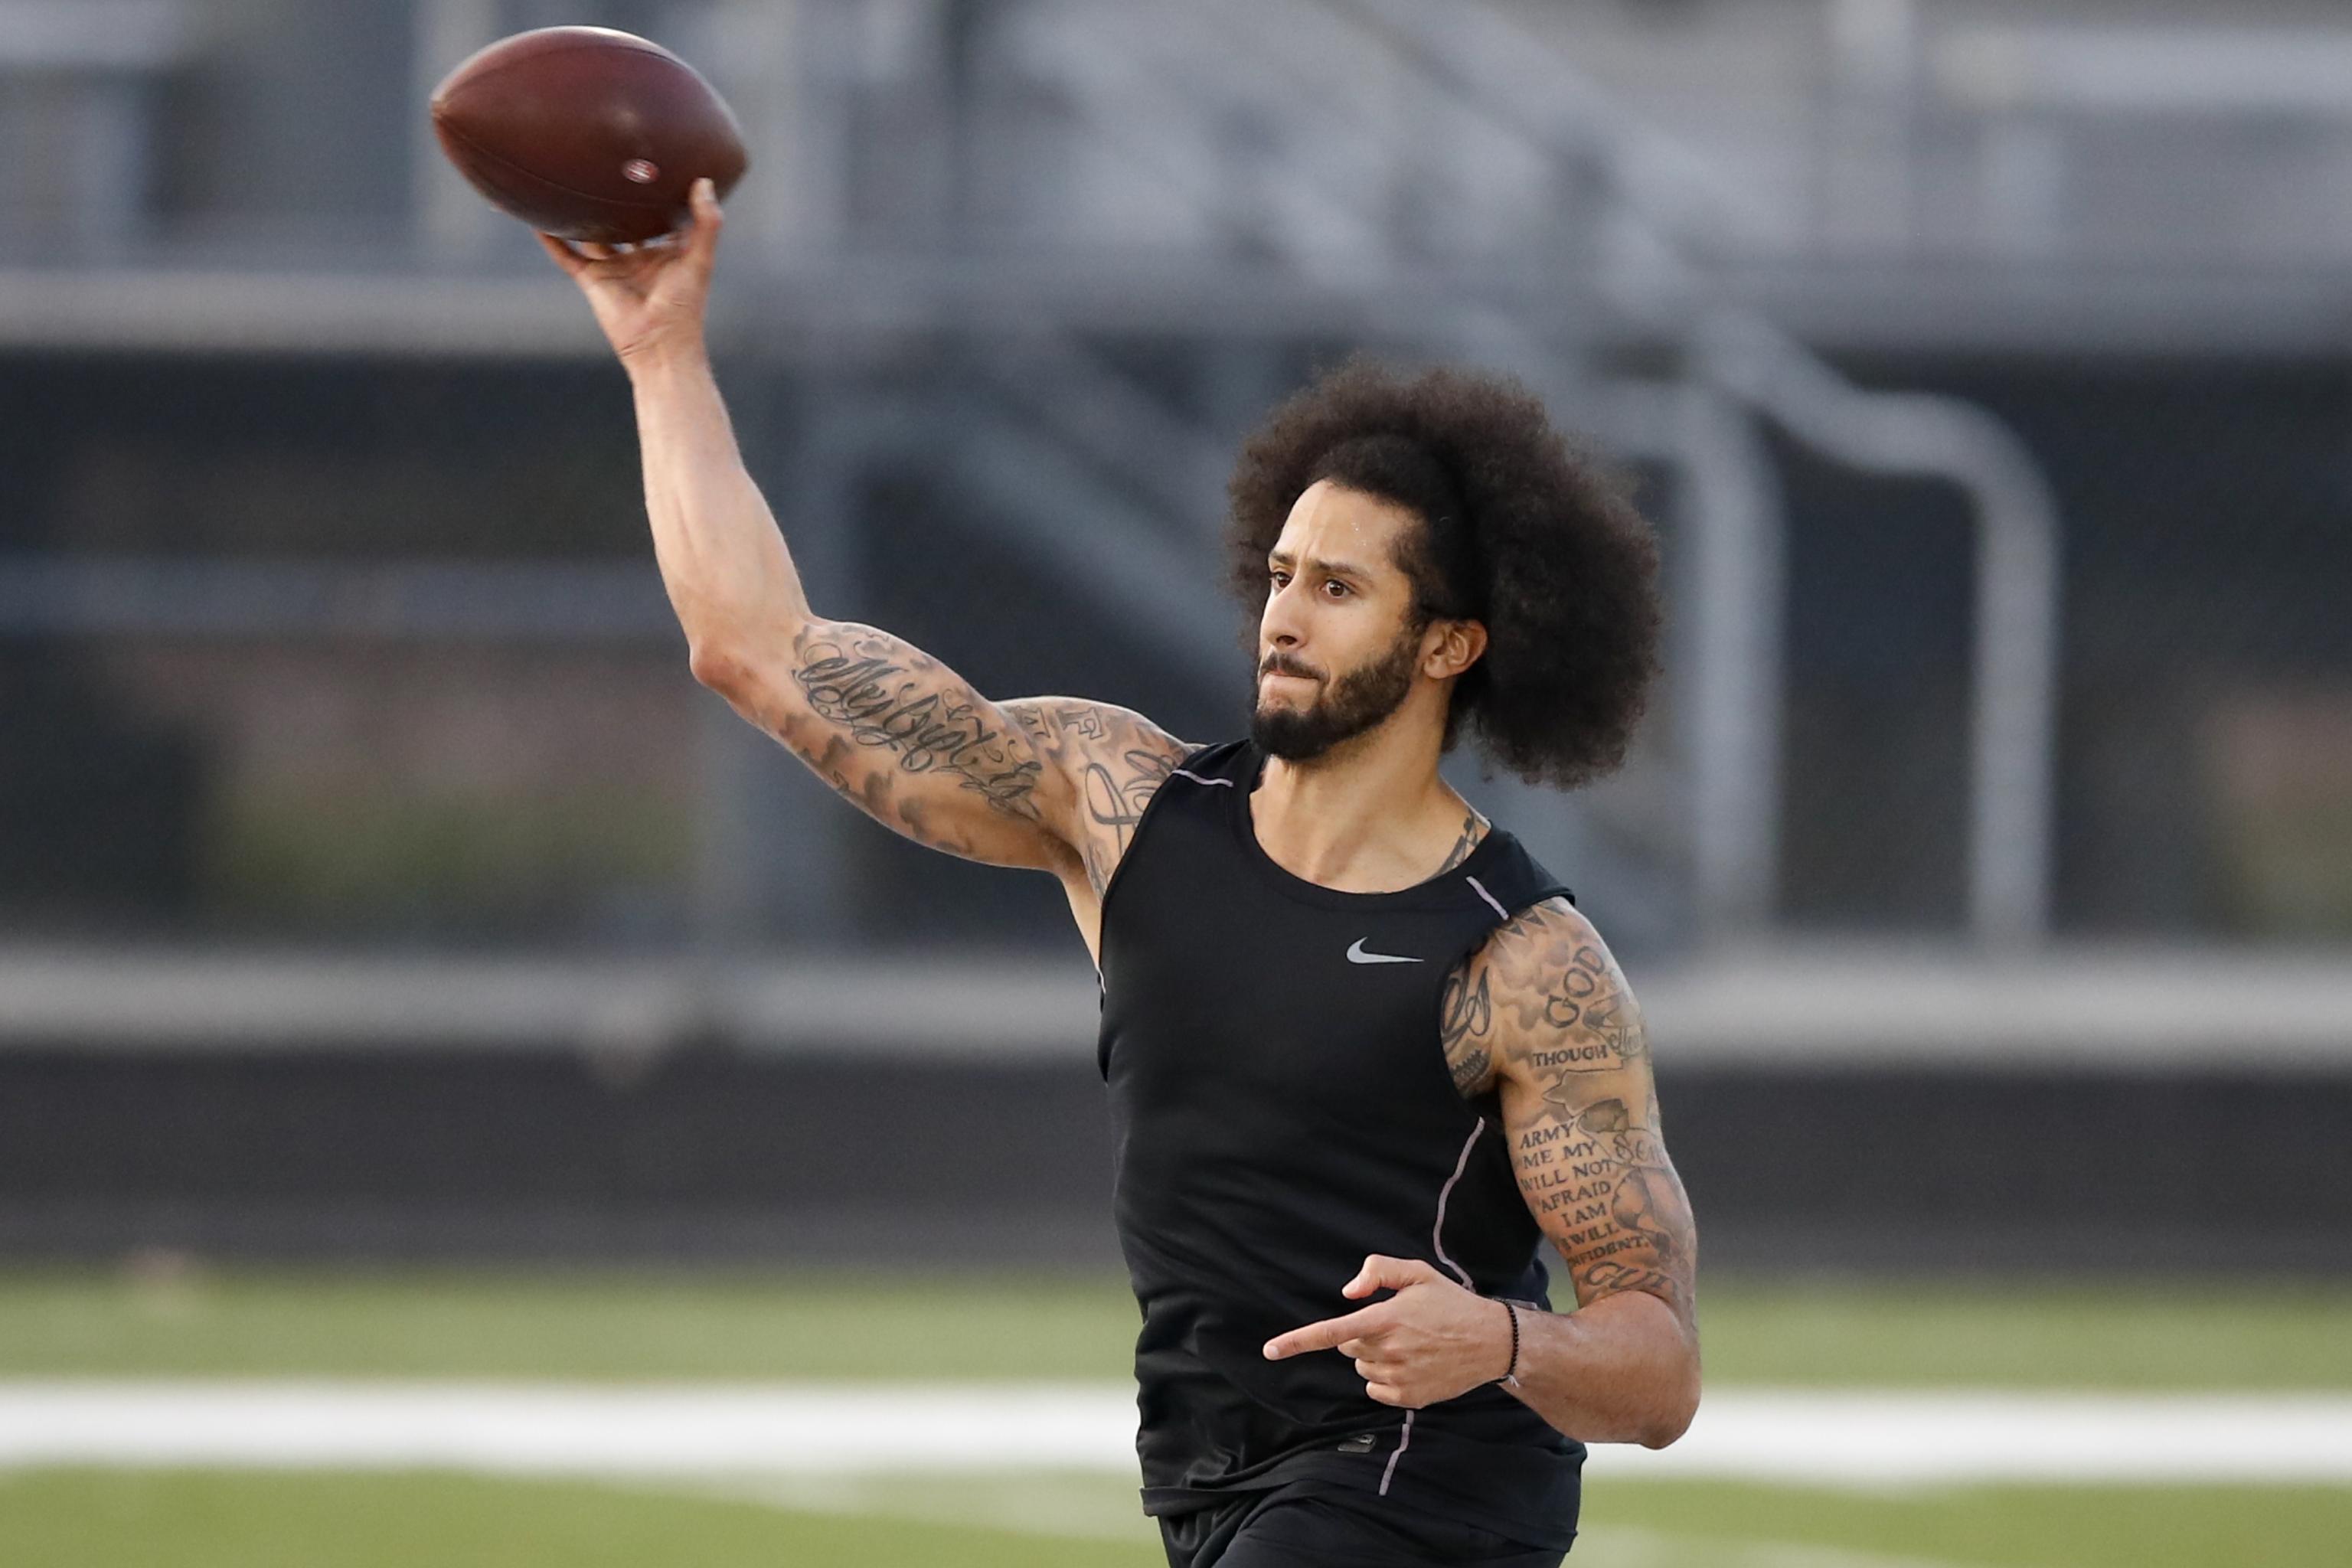 Colin Kaepernick Had 2 Hours to Accept NFL Workout, More Details